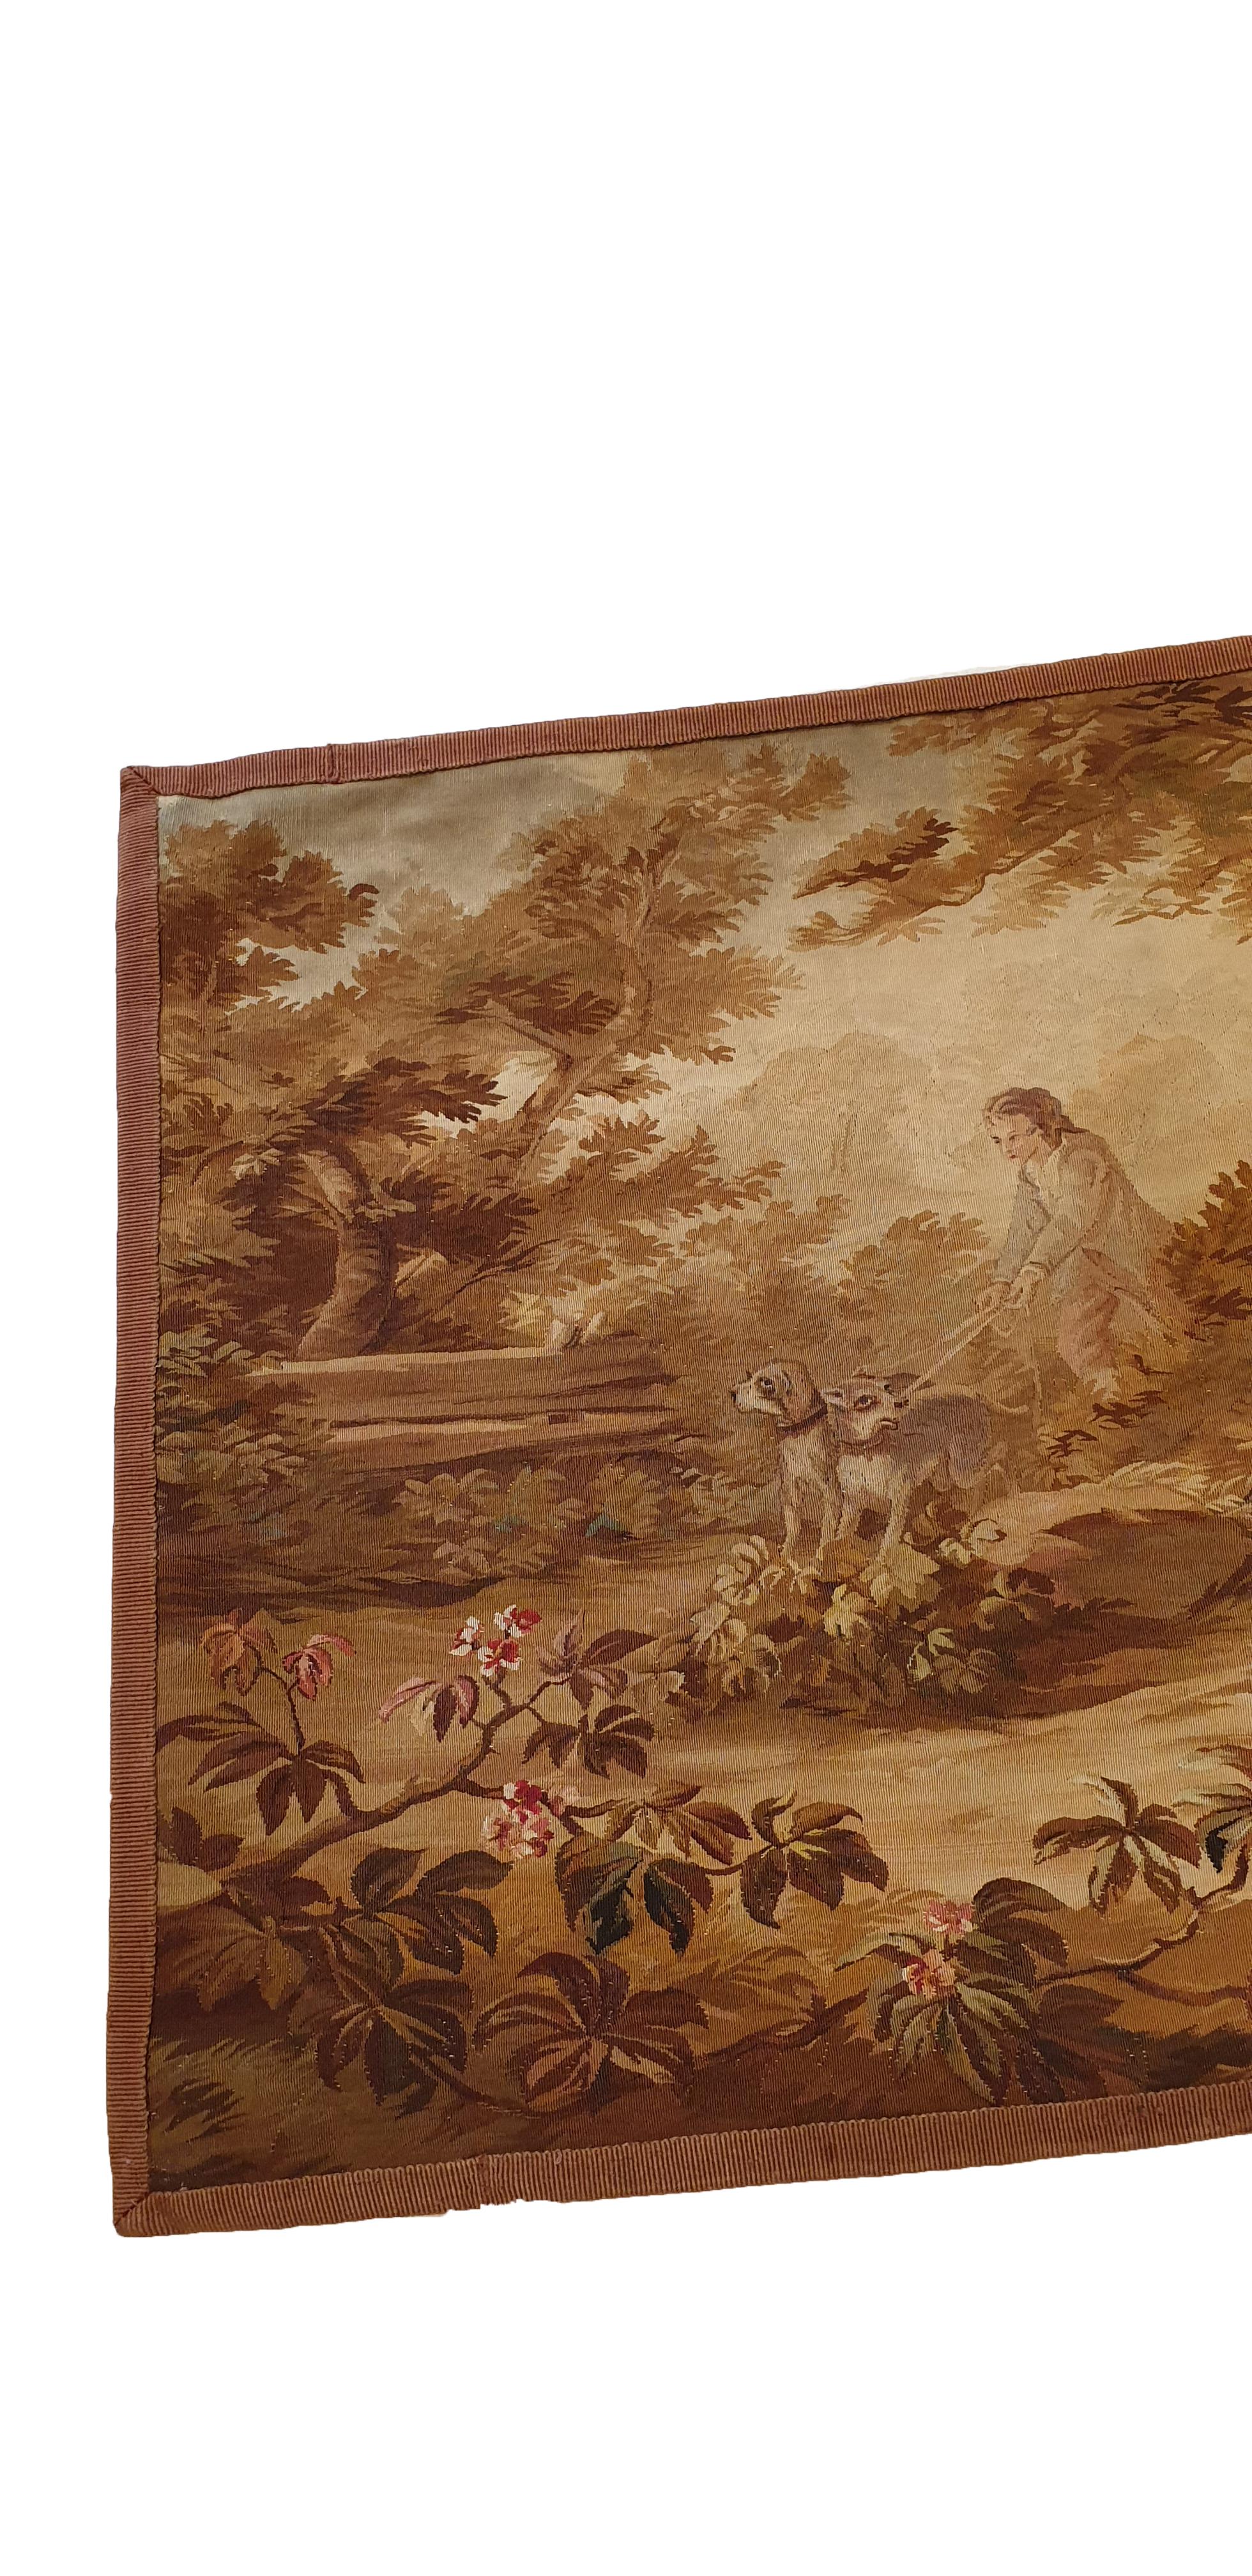  Tapestry Brussels, 19th Century - N° 704 In Excellent Condition For Sale In Paris, FR